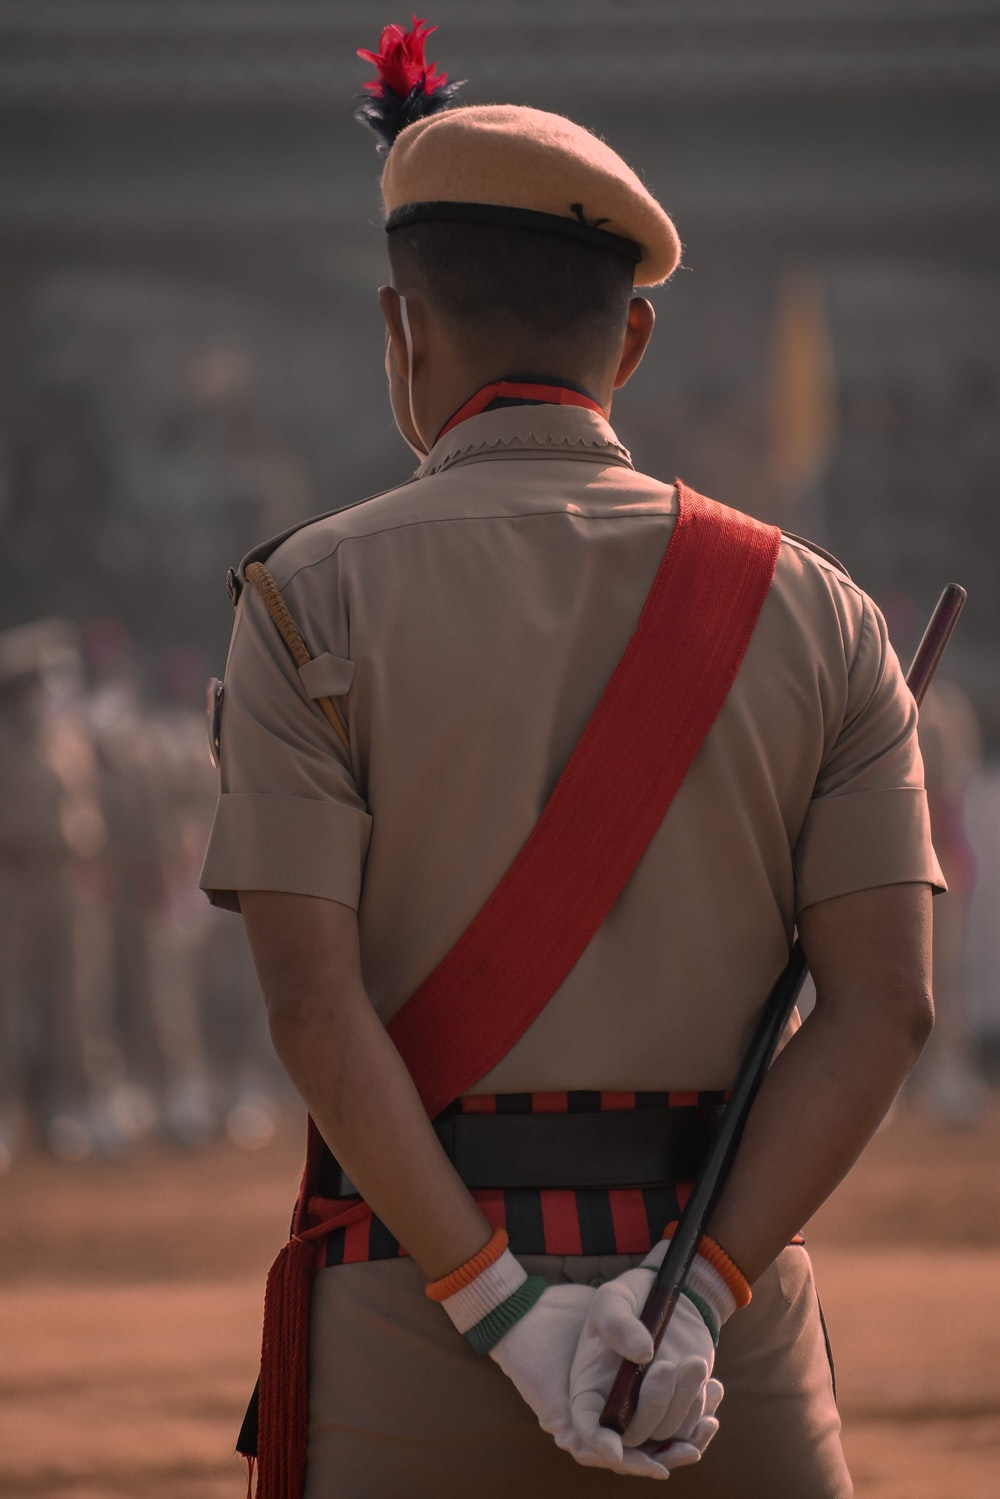 India Police Picture. Download Free Image